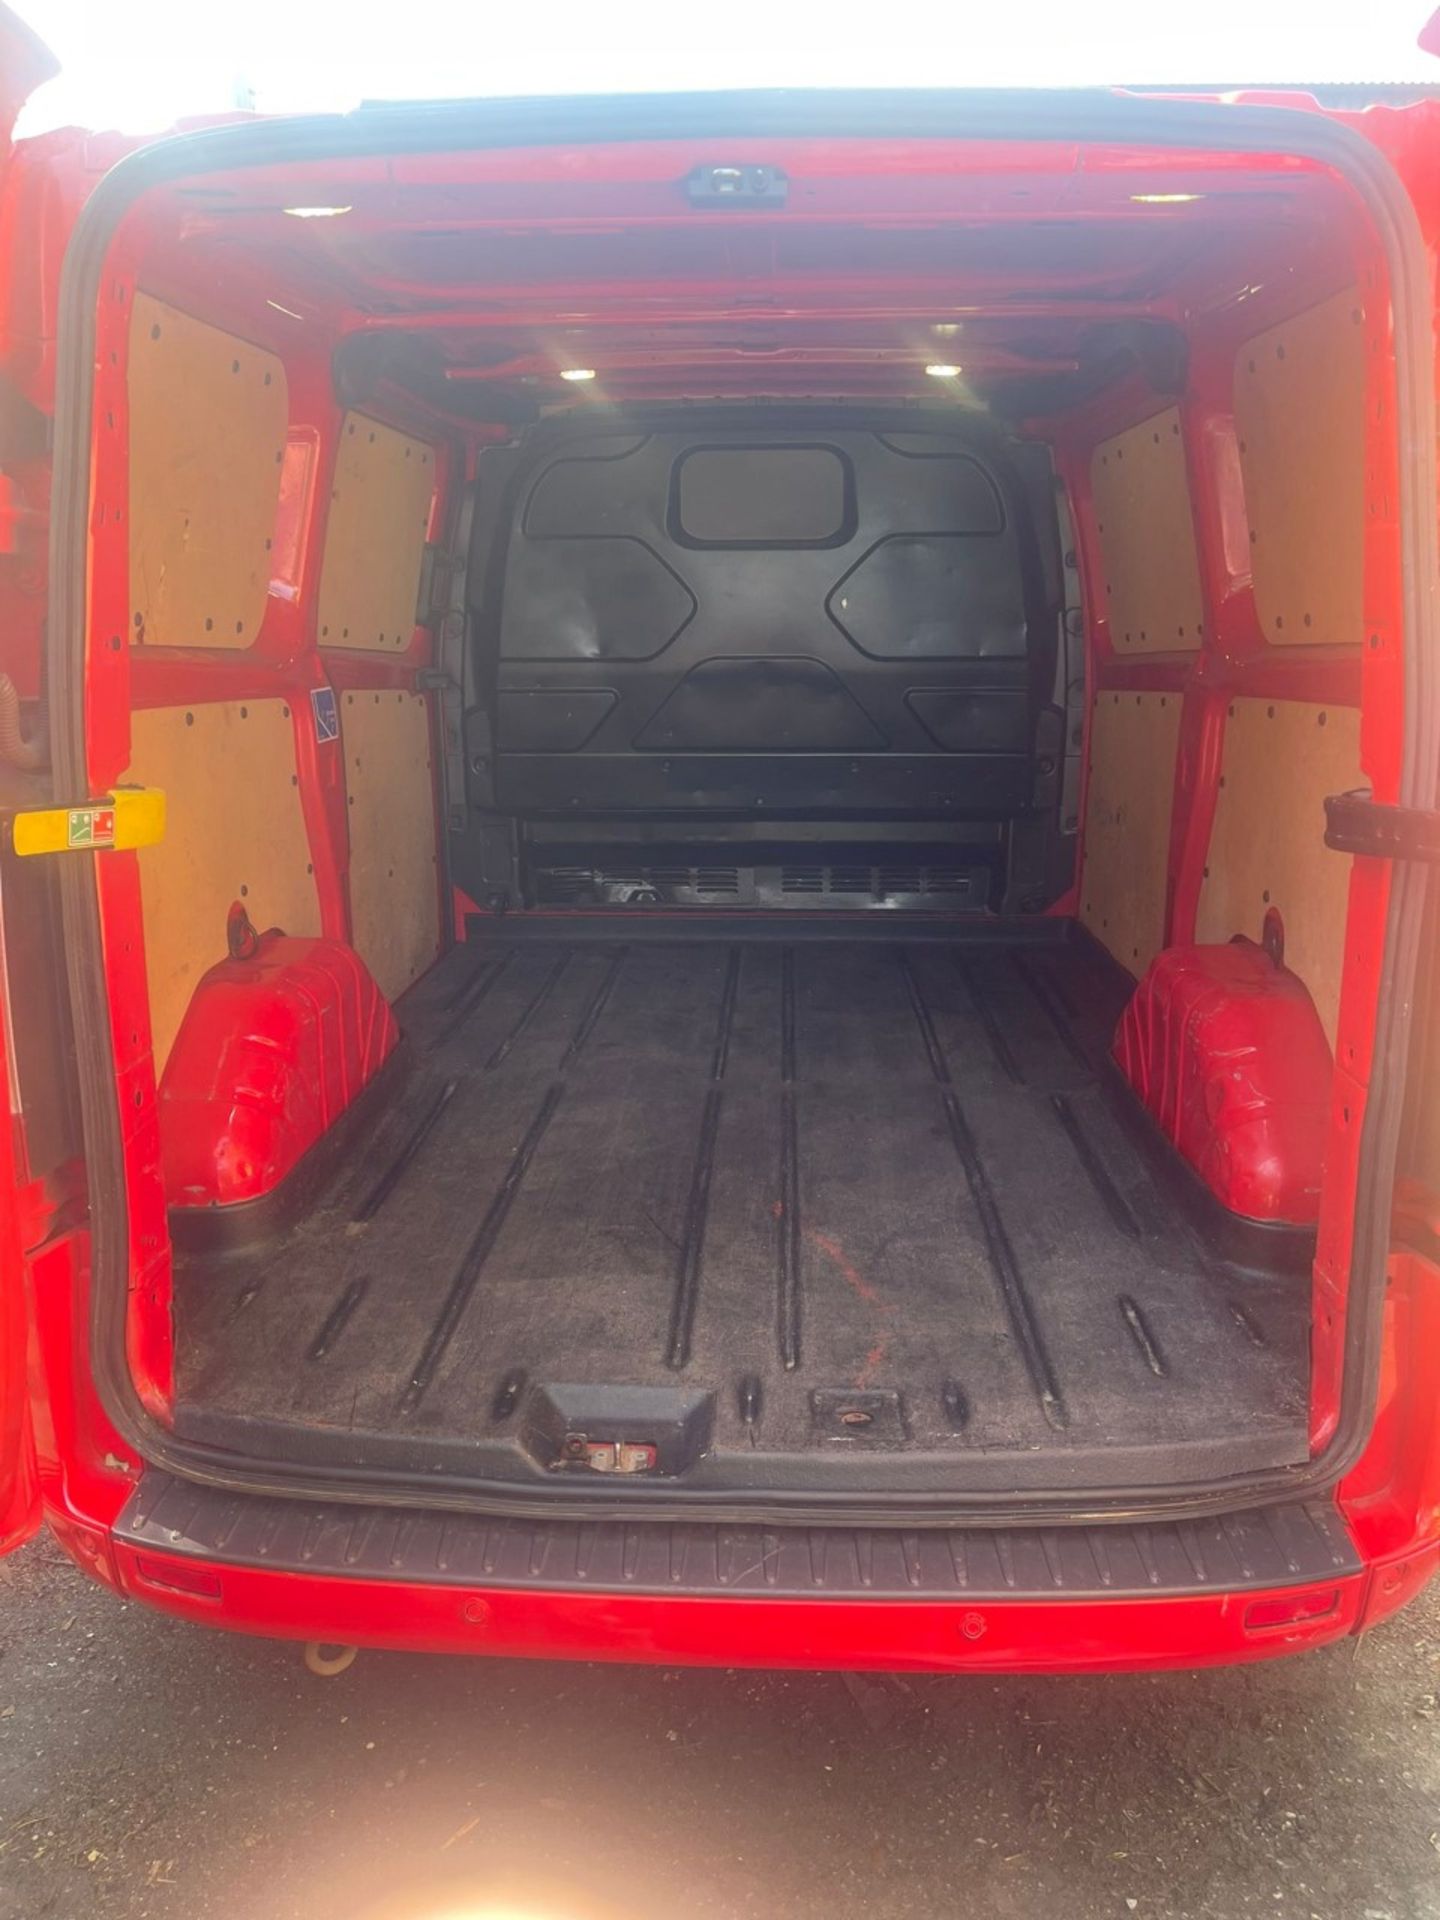 YT17 WJJ - FORD TRANSIT CUSTOM 290 L1 DIESEL FWD - 2.0 TDCi 170ps Low Roof Limited Van   Colour: Red - Image 5 of 7